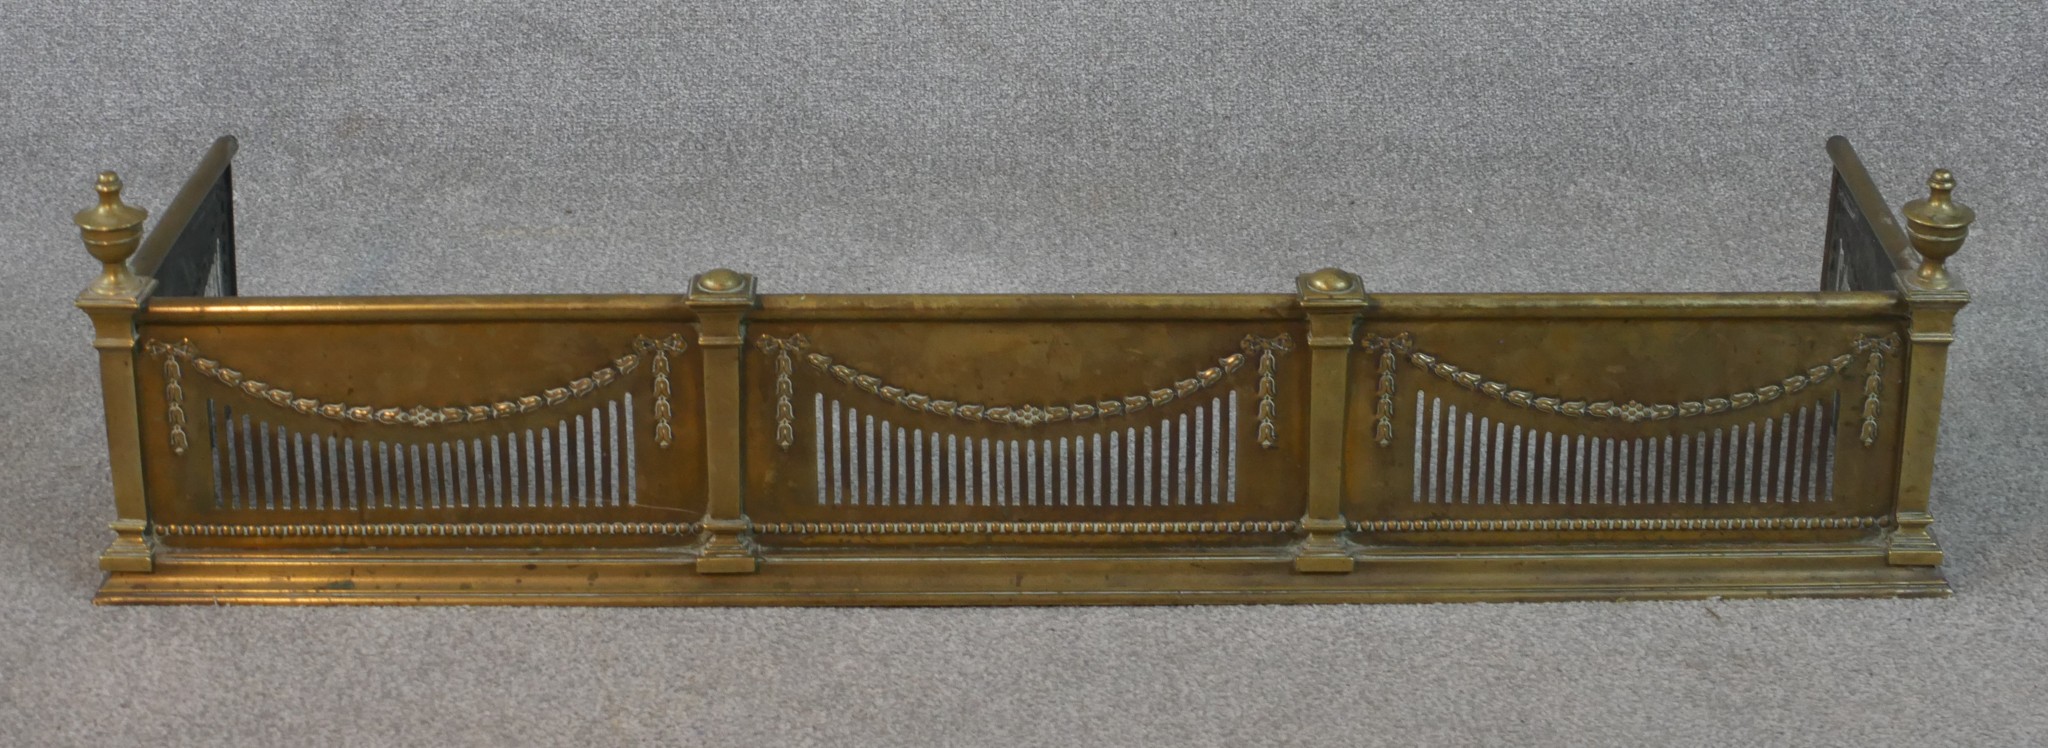 An Adam style pierced brass fender, with urn finials to the corners, decorated with swags and a